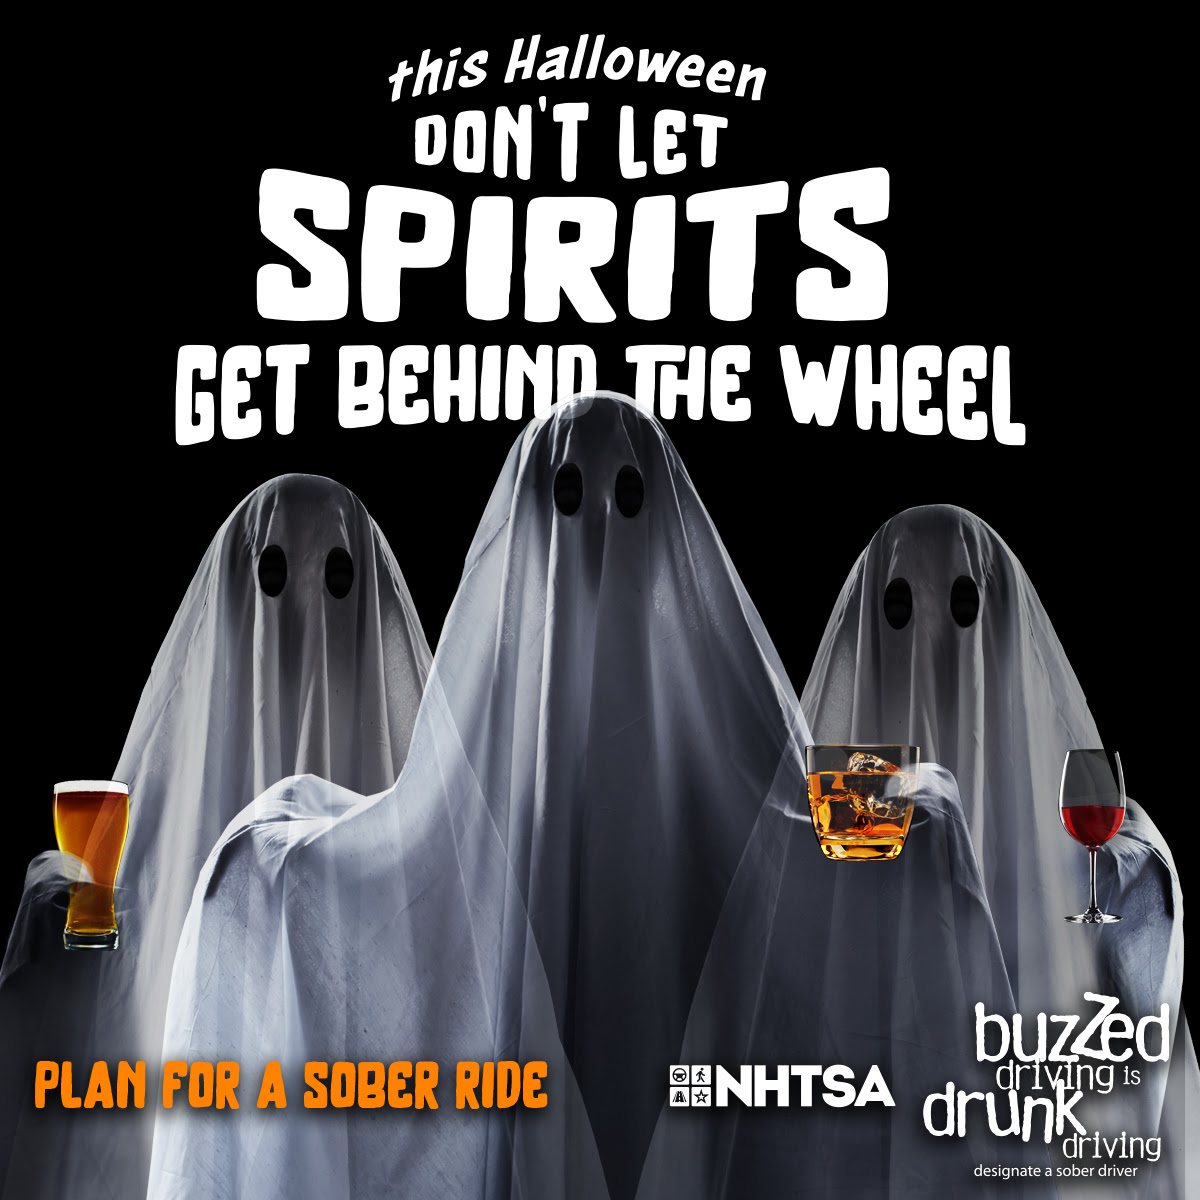 Don’t turn your Halloween into a spooky nightmare. Plan ahead for a sober ride home! #DriveSafeOhio